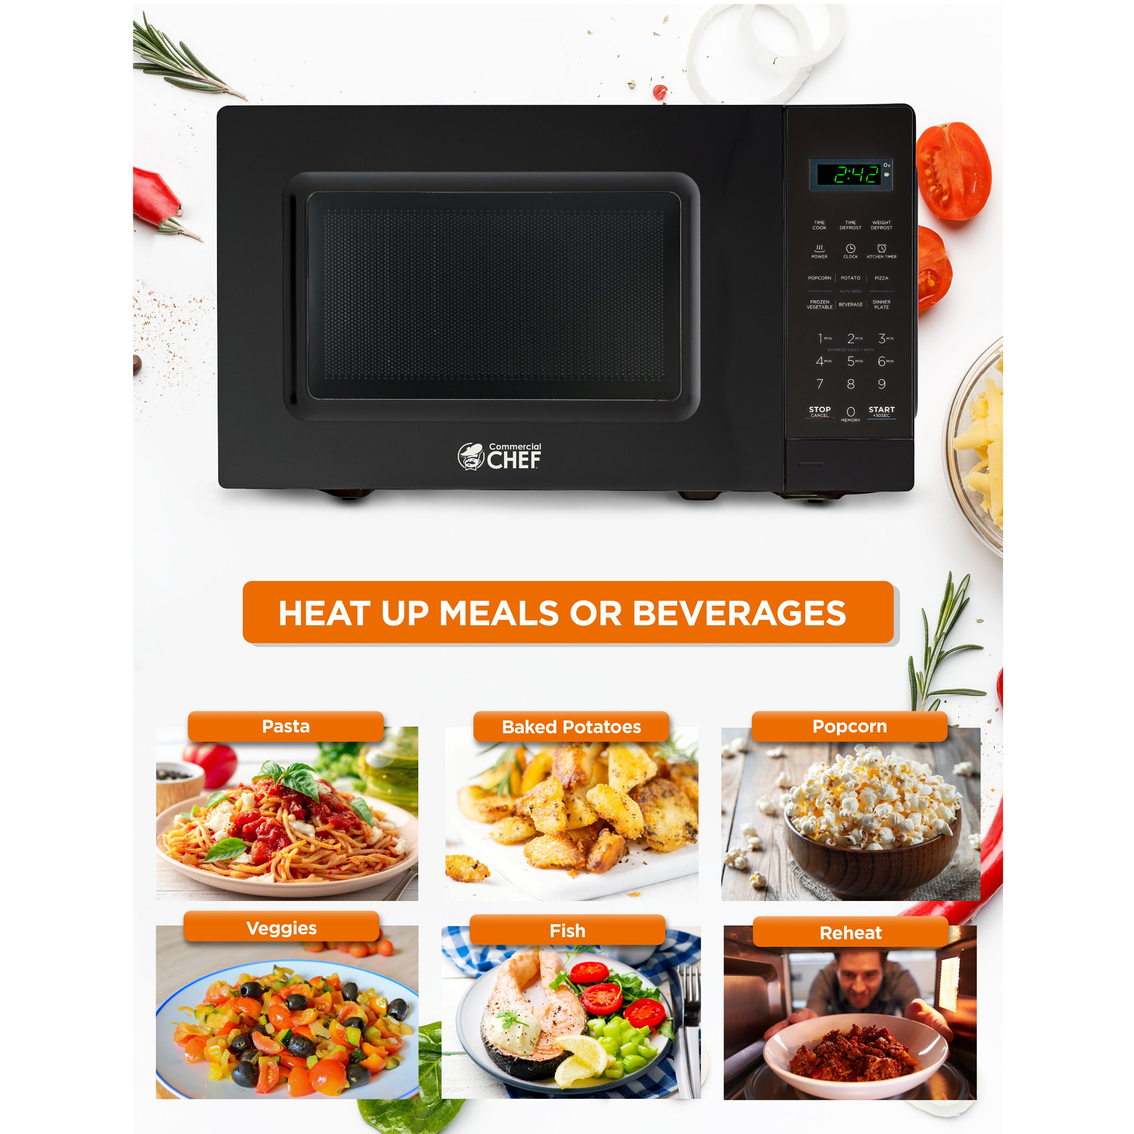 Commercial Chef 0.7 Cu. Ft. Countertop Microwave Oven - Image 2 of 7